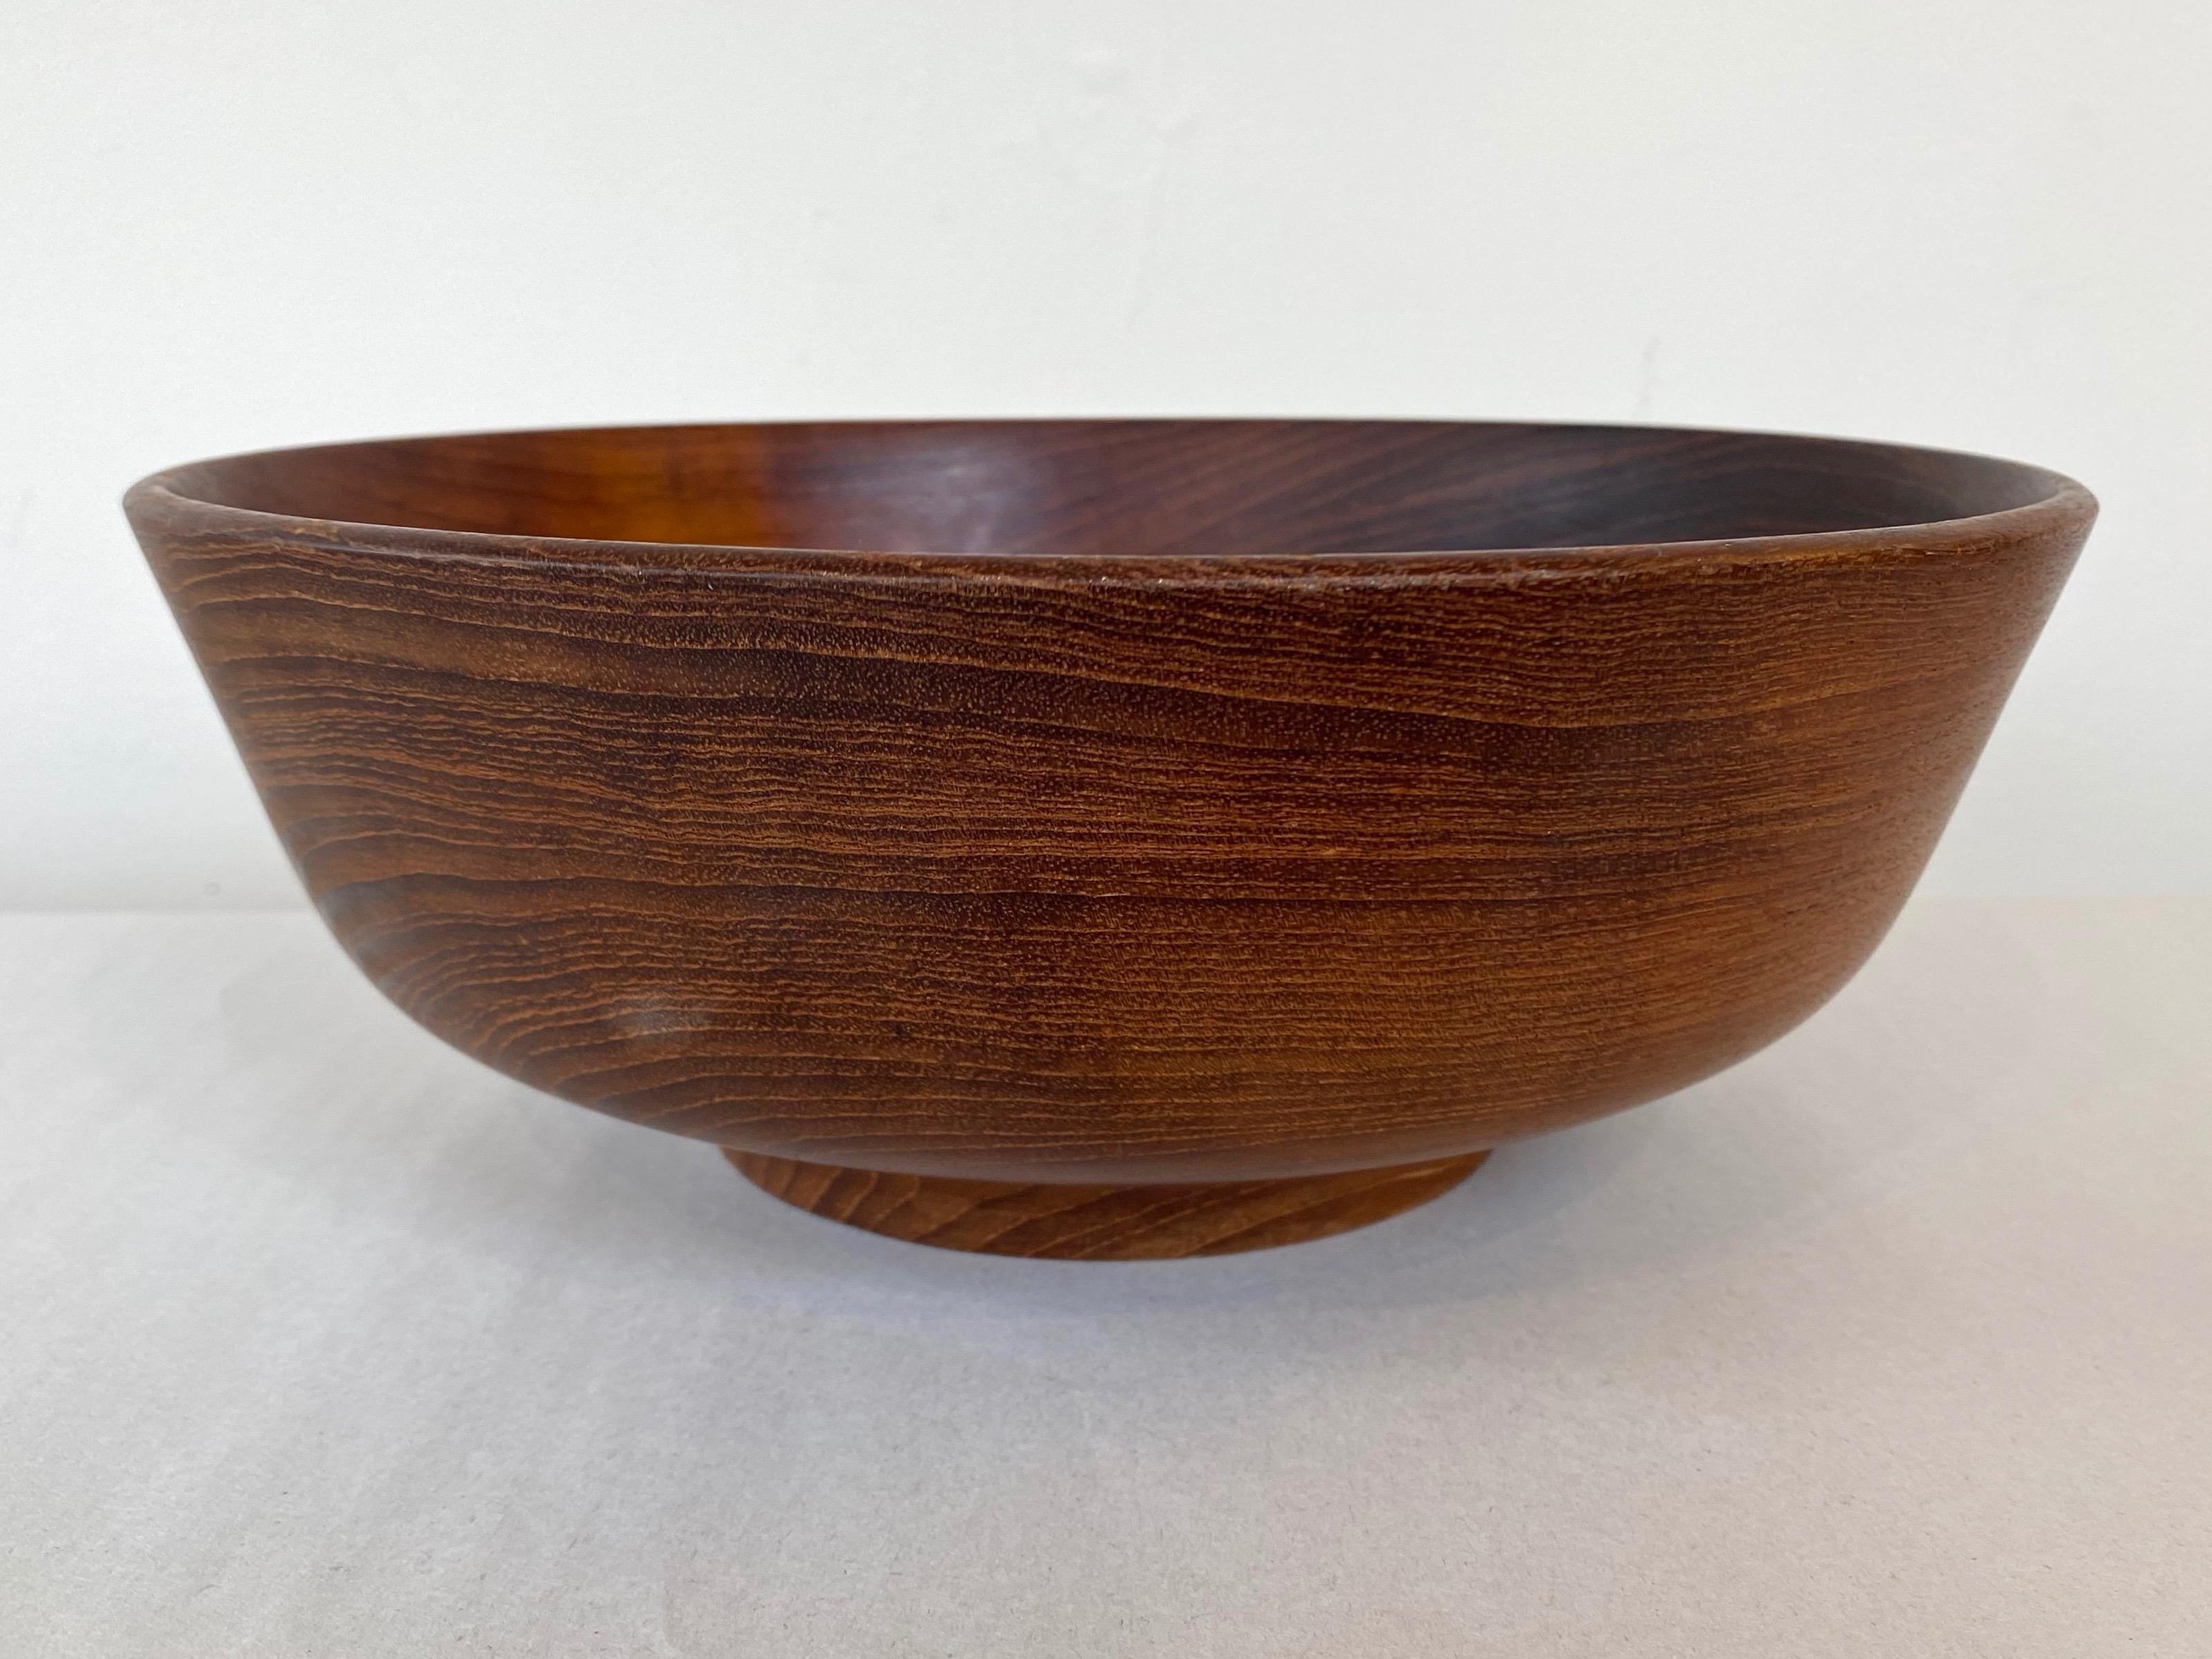 Bob Stocksdale Teak Turned Wood Bowl with Exceptional Grain Pattern, Early 1970s For Sale 2